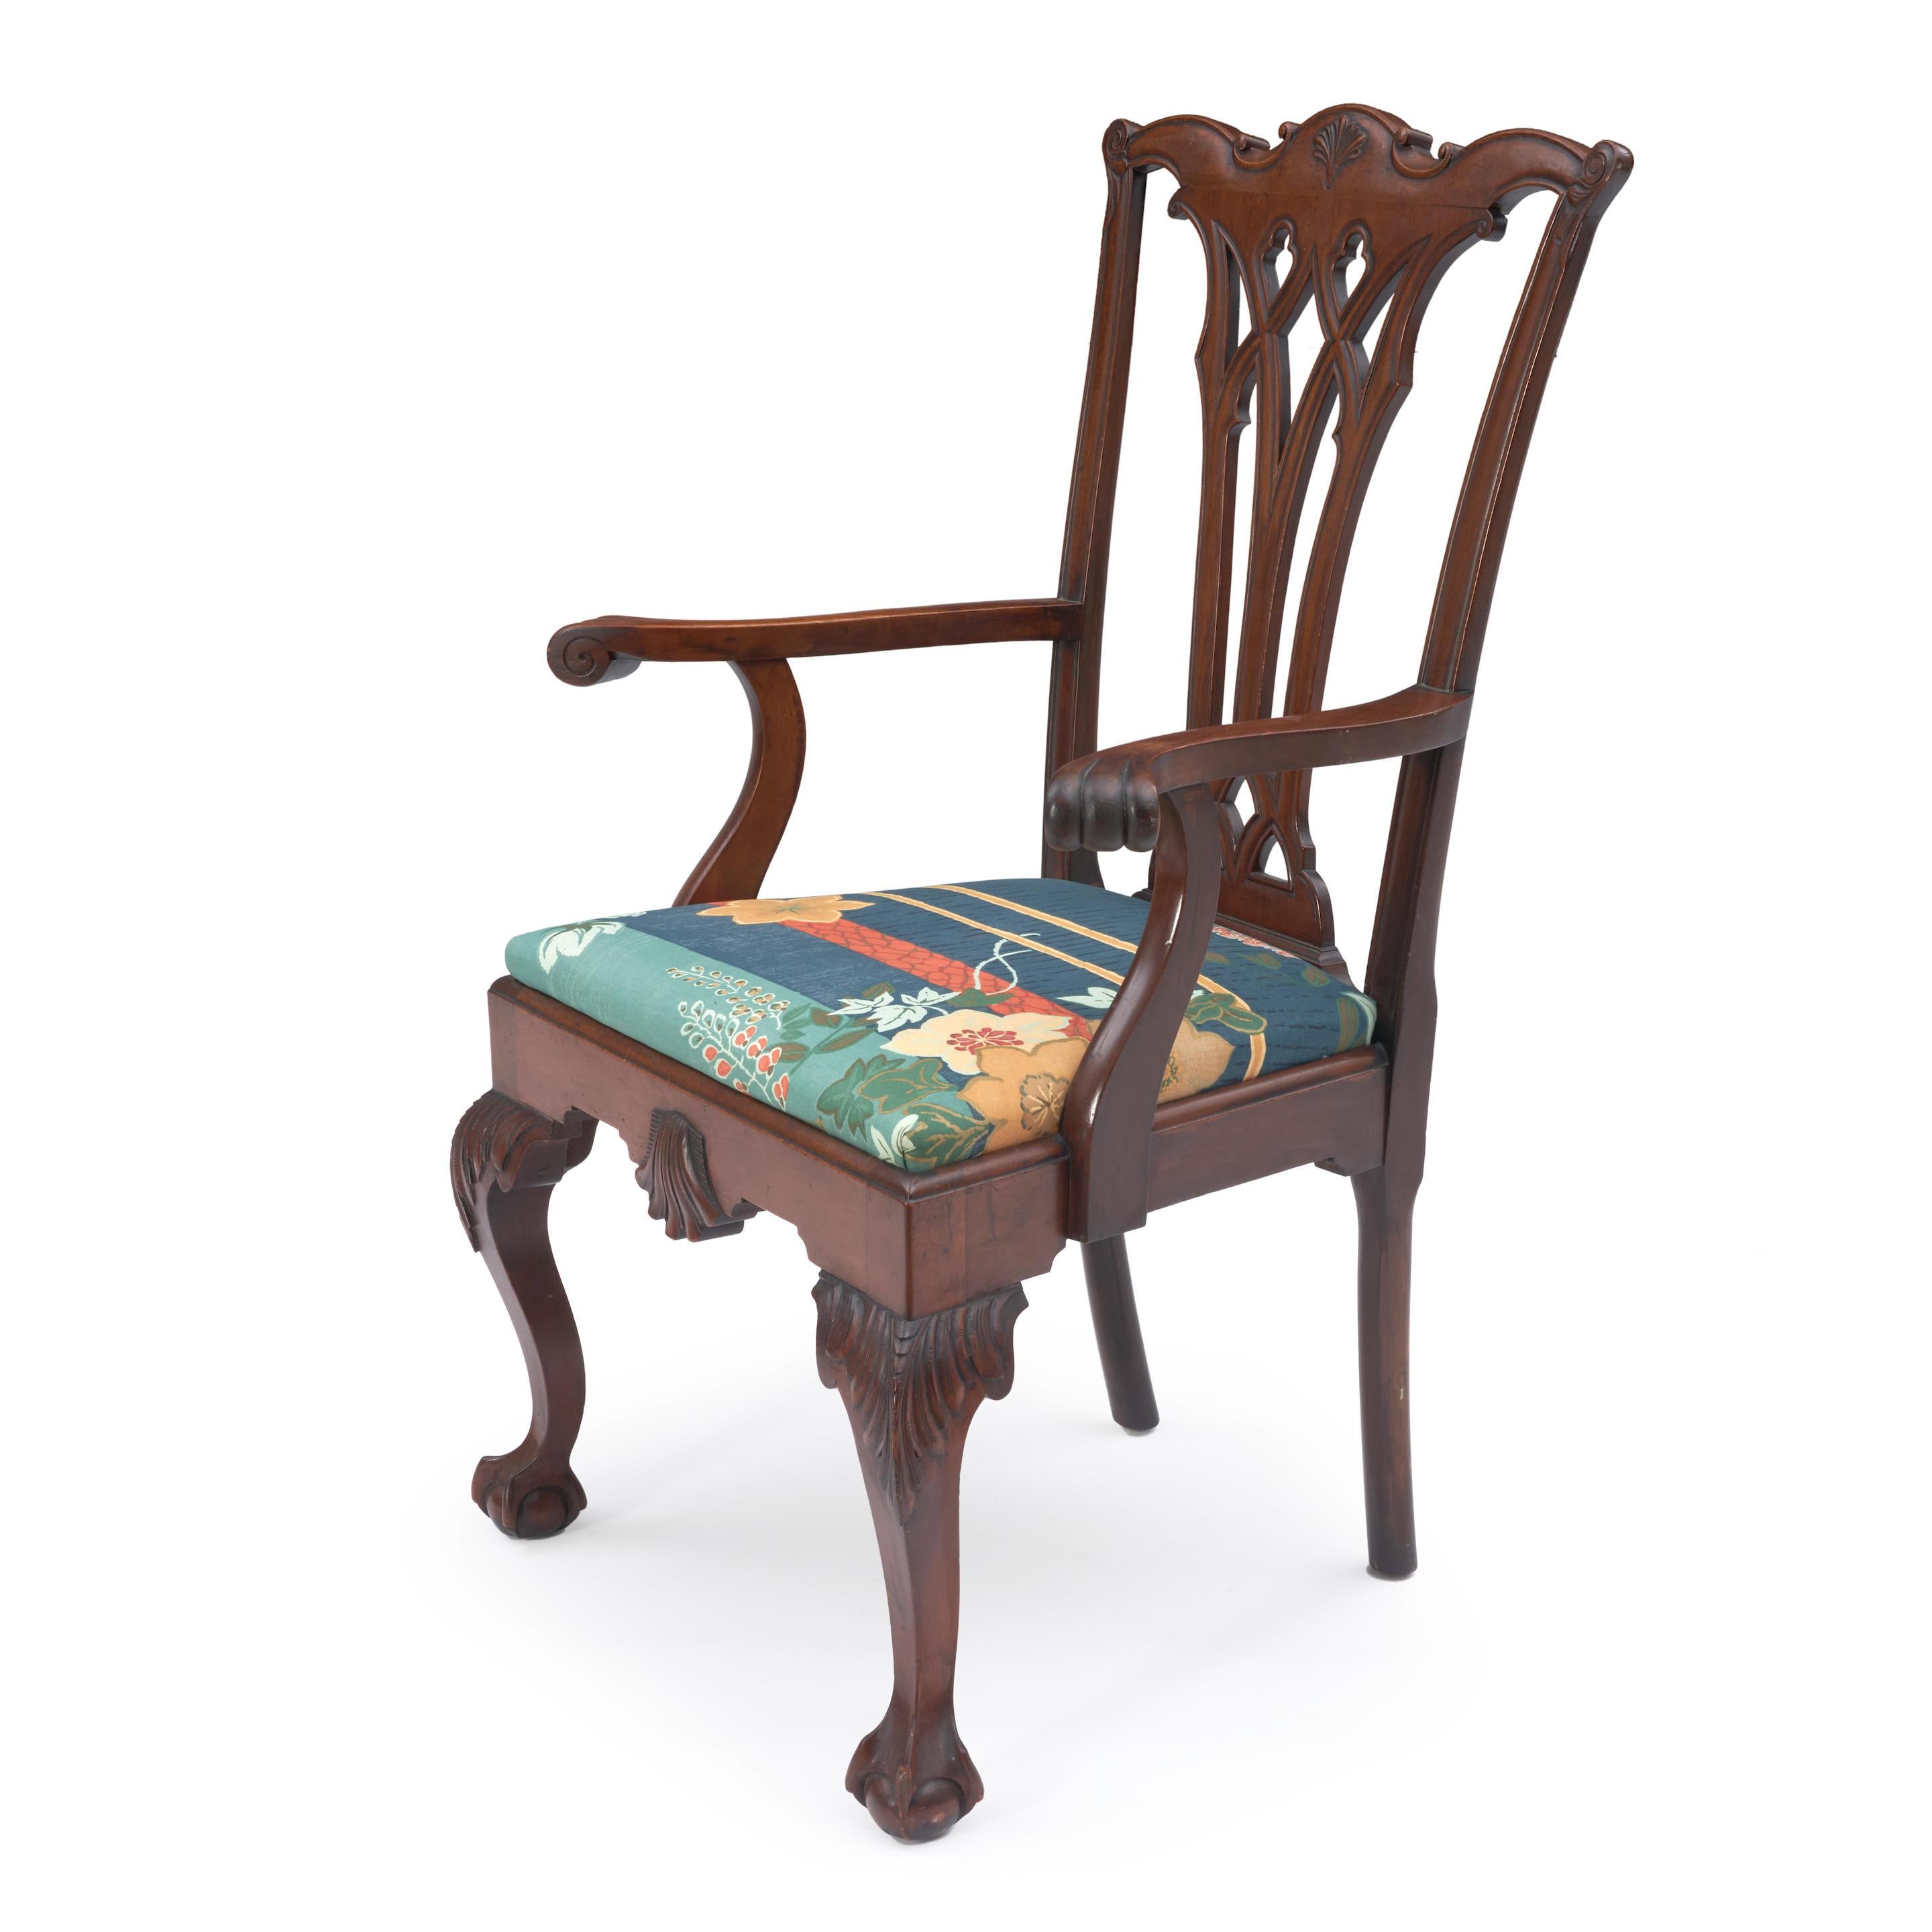 Chippendale Style Carved Mahogany Armchair with carved knees and claw-and-ball feet, and a pierced vasiform backsplat, a large size chair and very comfortable for seating. 
ht. 40, wd. 26, dp. 20 in.
